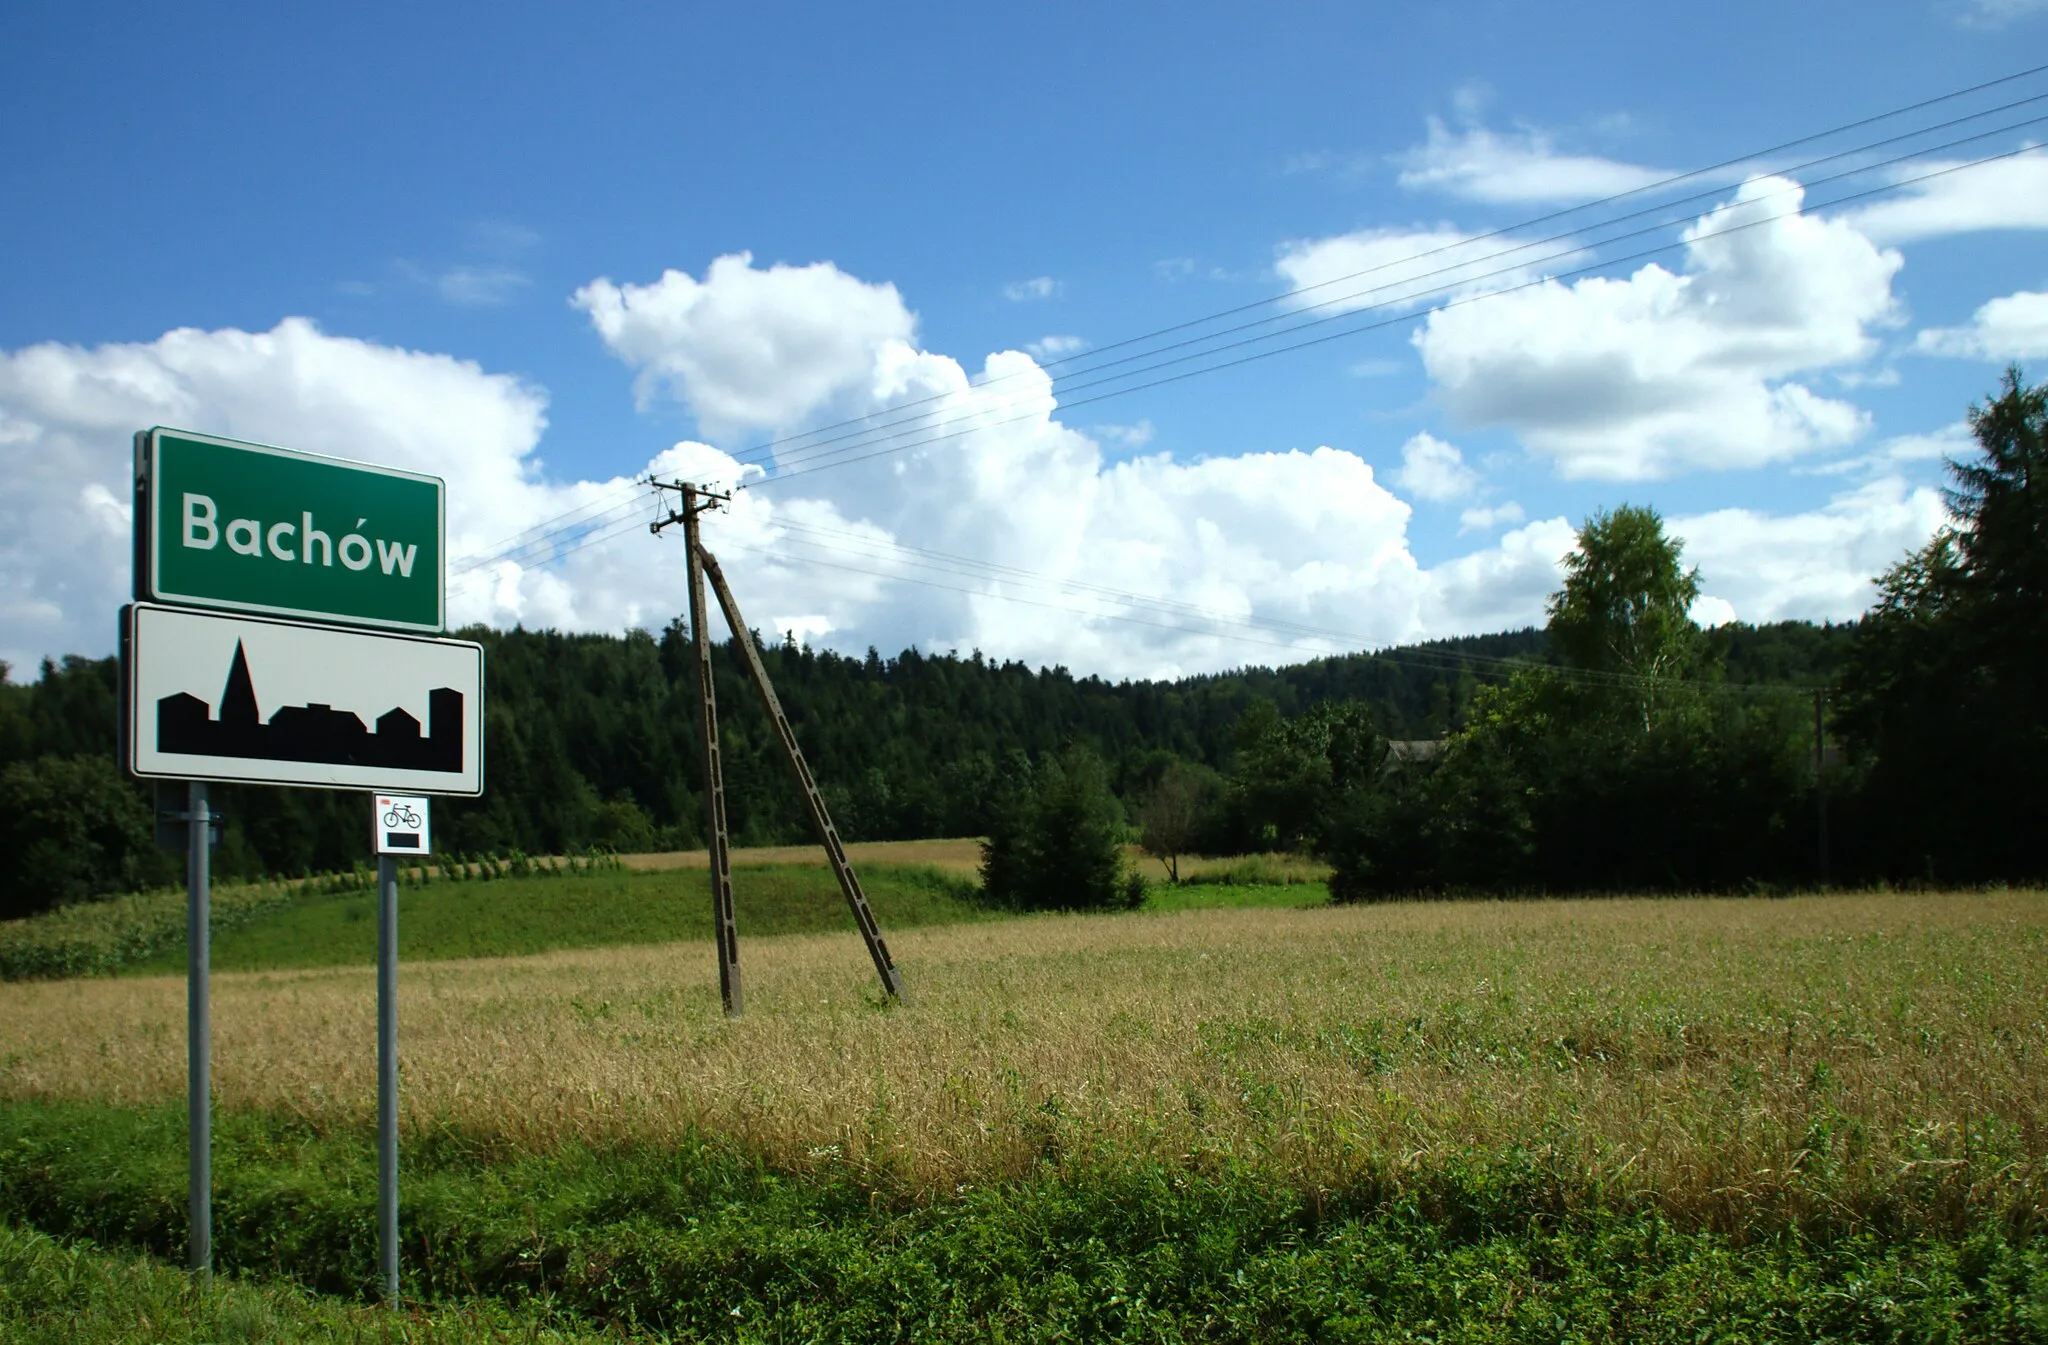 Photo showing: Polish road signs (znak E-17a: inhabited area; znak D-42: built up area; znak R-1: regional cycle route). Arriving to the village of Bachów, Podkarpackie voivodeship, Poland